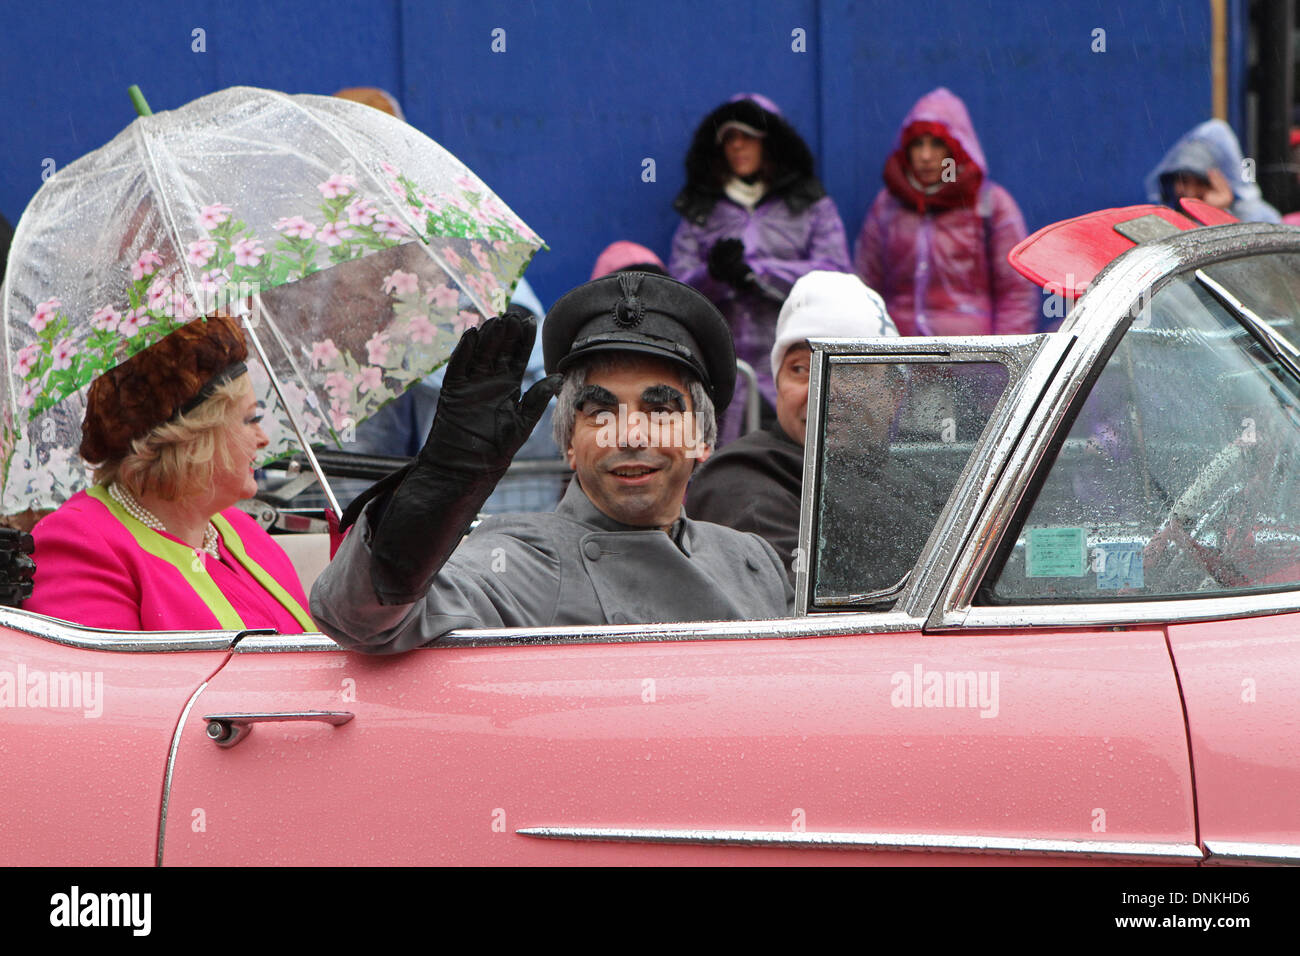 London,UK,1er janvier 2014,Lady Penelope de thunderbirds au London's New Year's Day Parade 2014 Credit : Keith Larby/Alamy Live News Banque D'Images